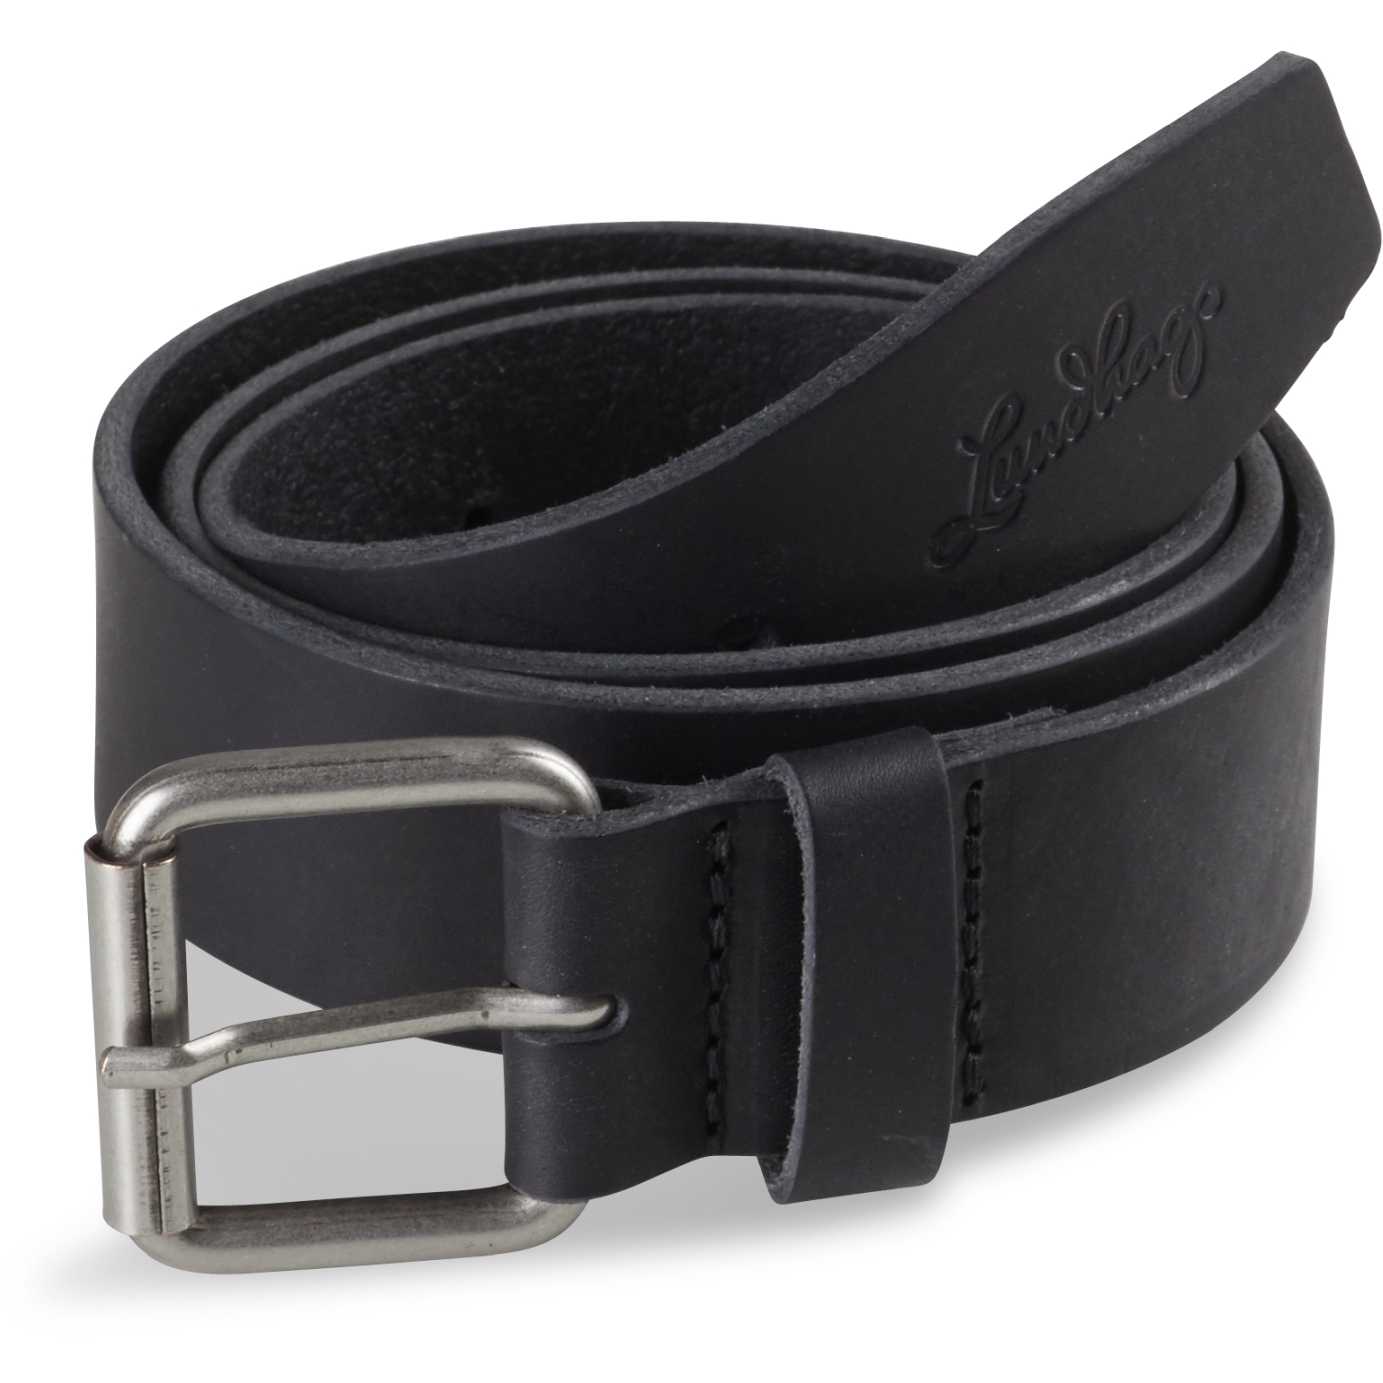 Picture of Lundhags Venture Belt - Black 900